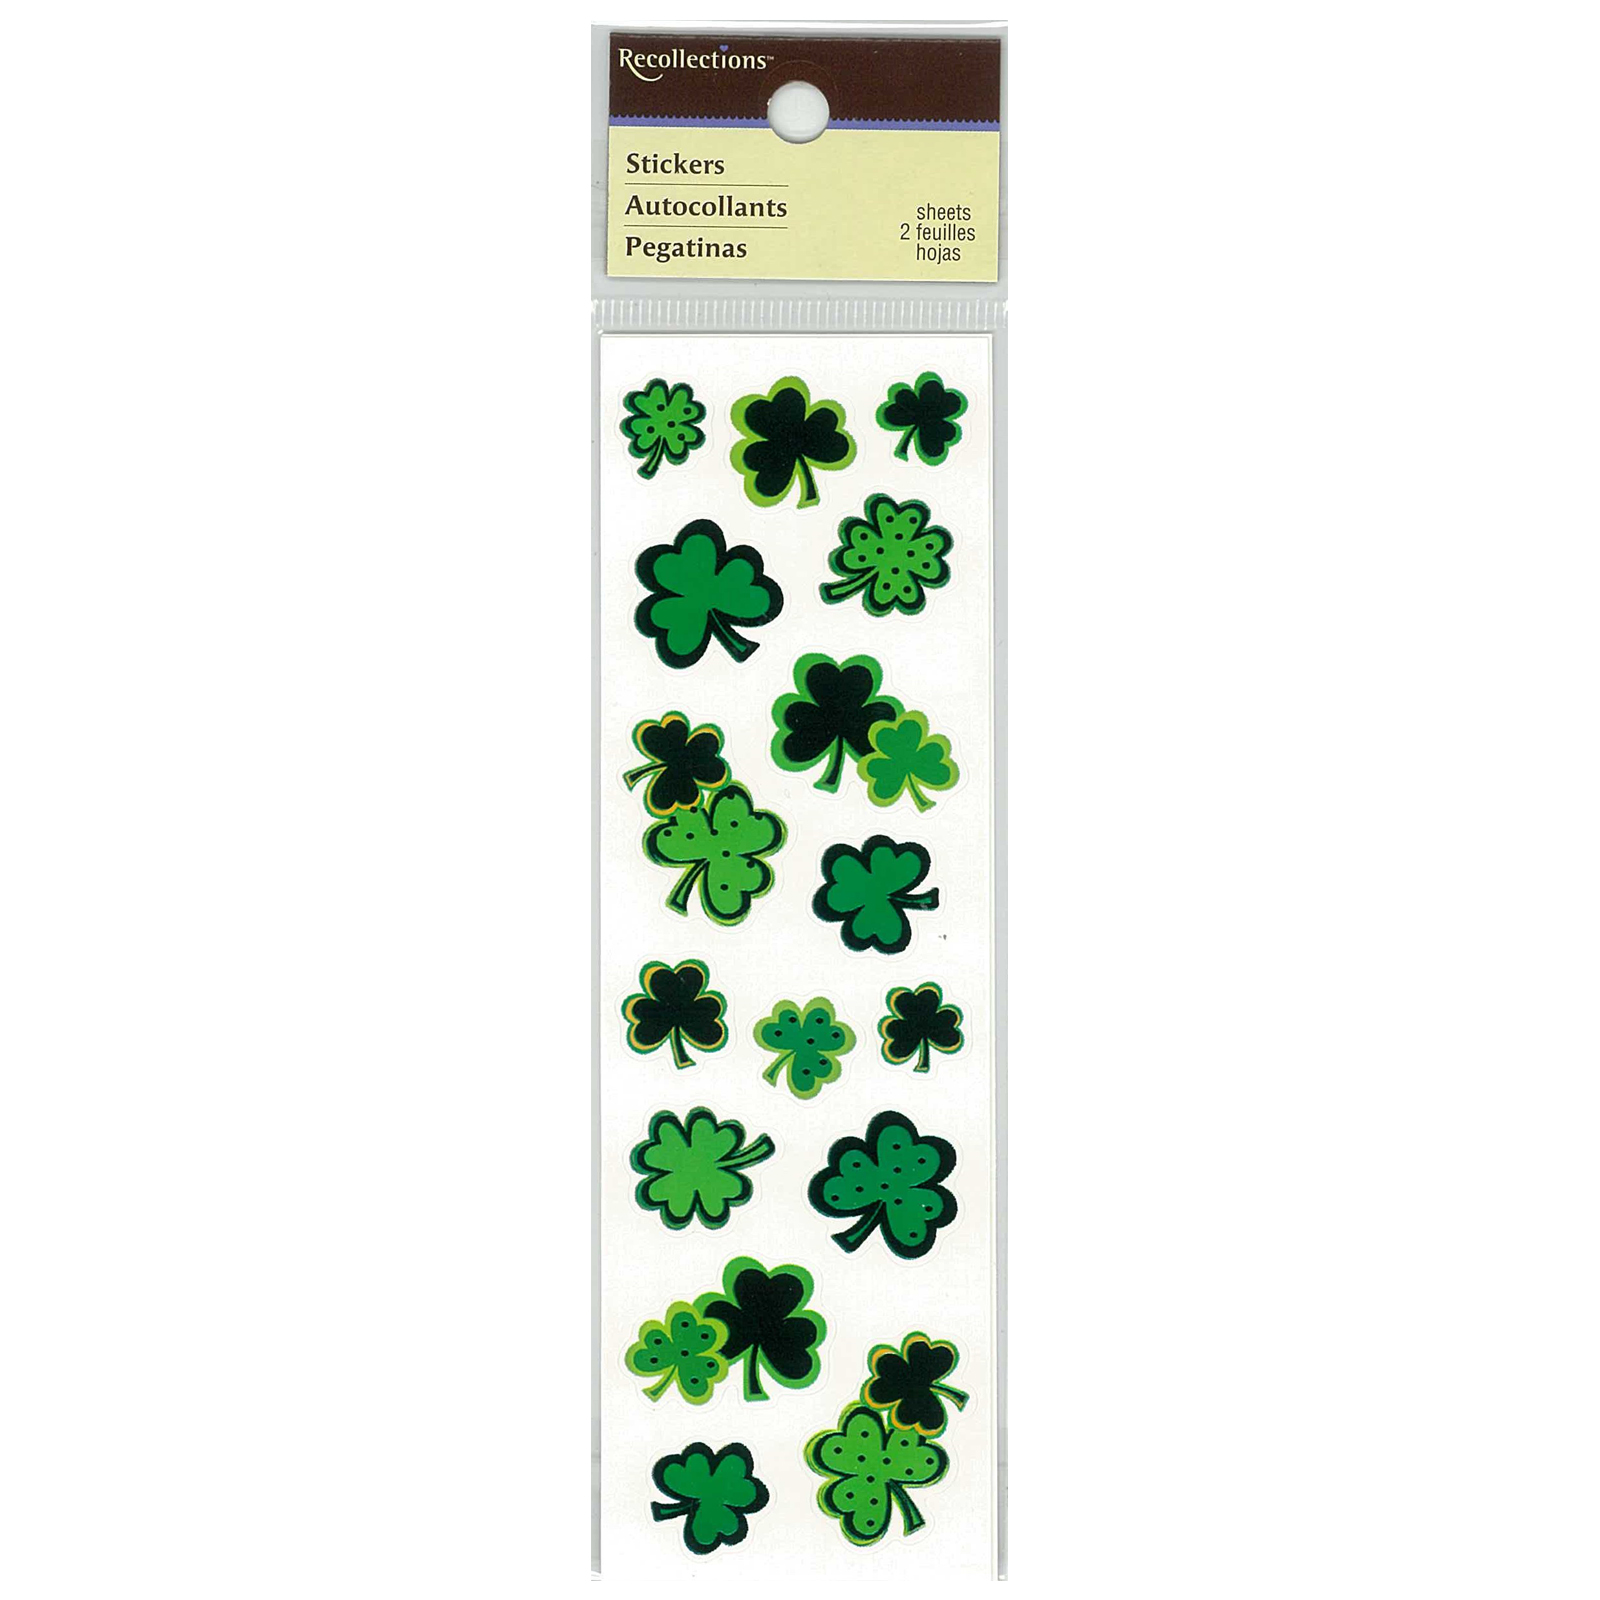 Buy the Shamrocks Stickers by Recollections™ at Michaels